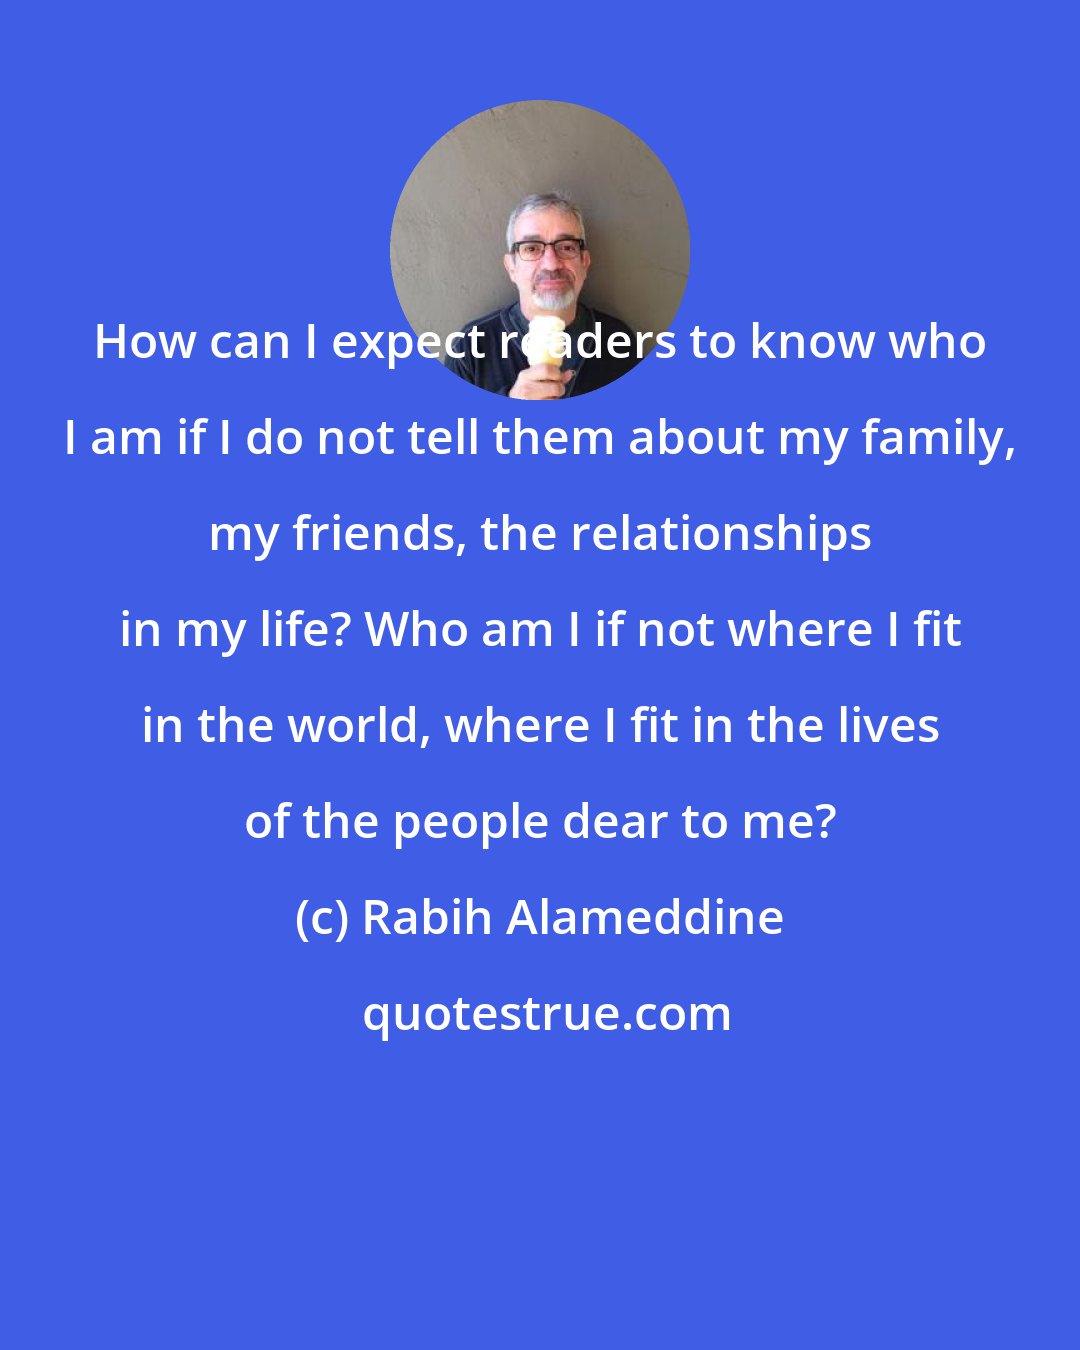 Rabih Alameddine: How can I expect readers to know who I am if I do not tell them about my family, my friends, the relationships in my life? Who am I if not where I fit in the world, where I fit in the lives of the people dear to me?